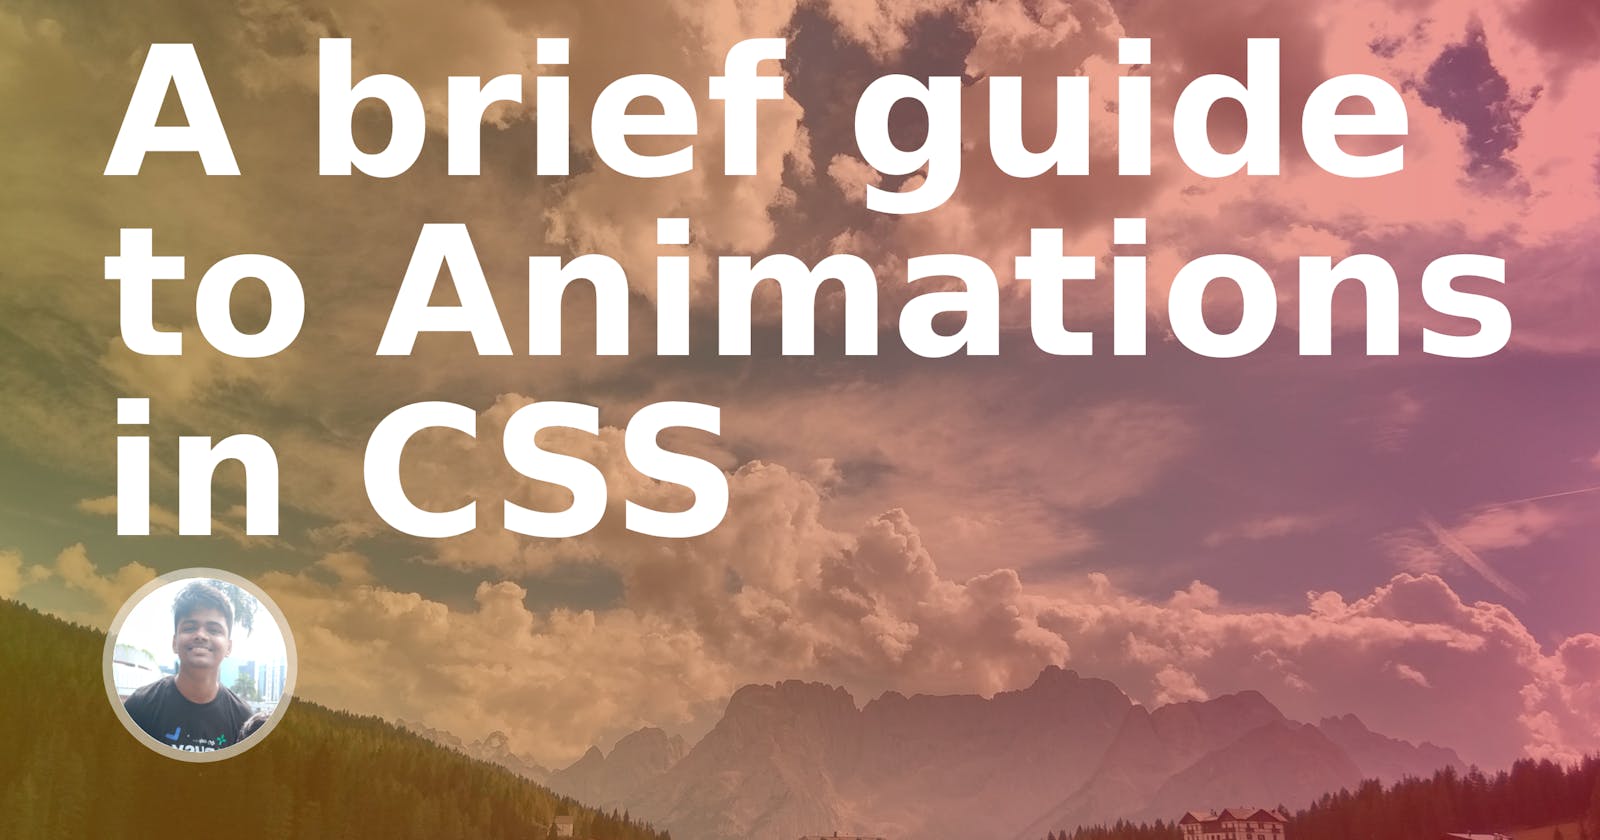 A brief guide to Animations in CSS